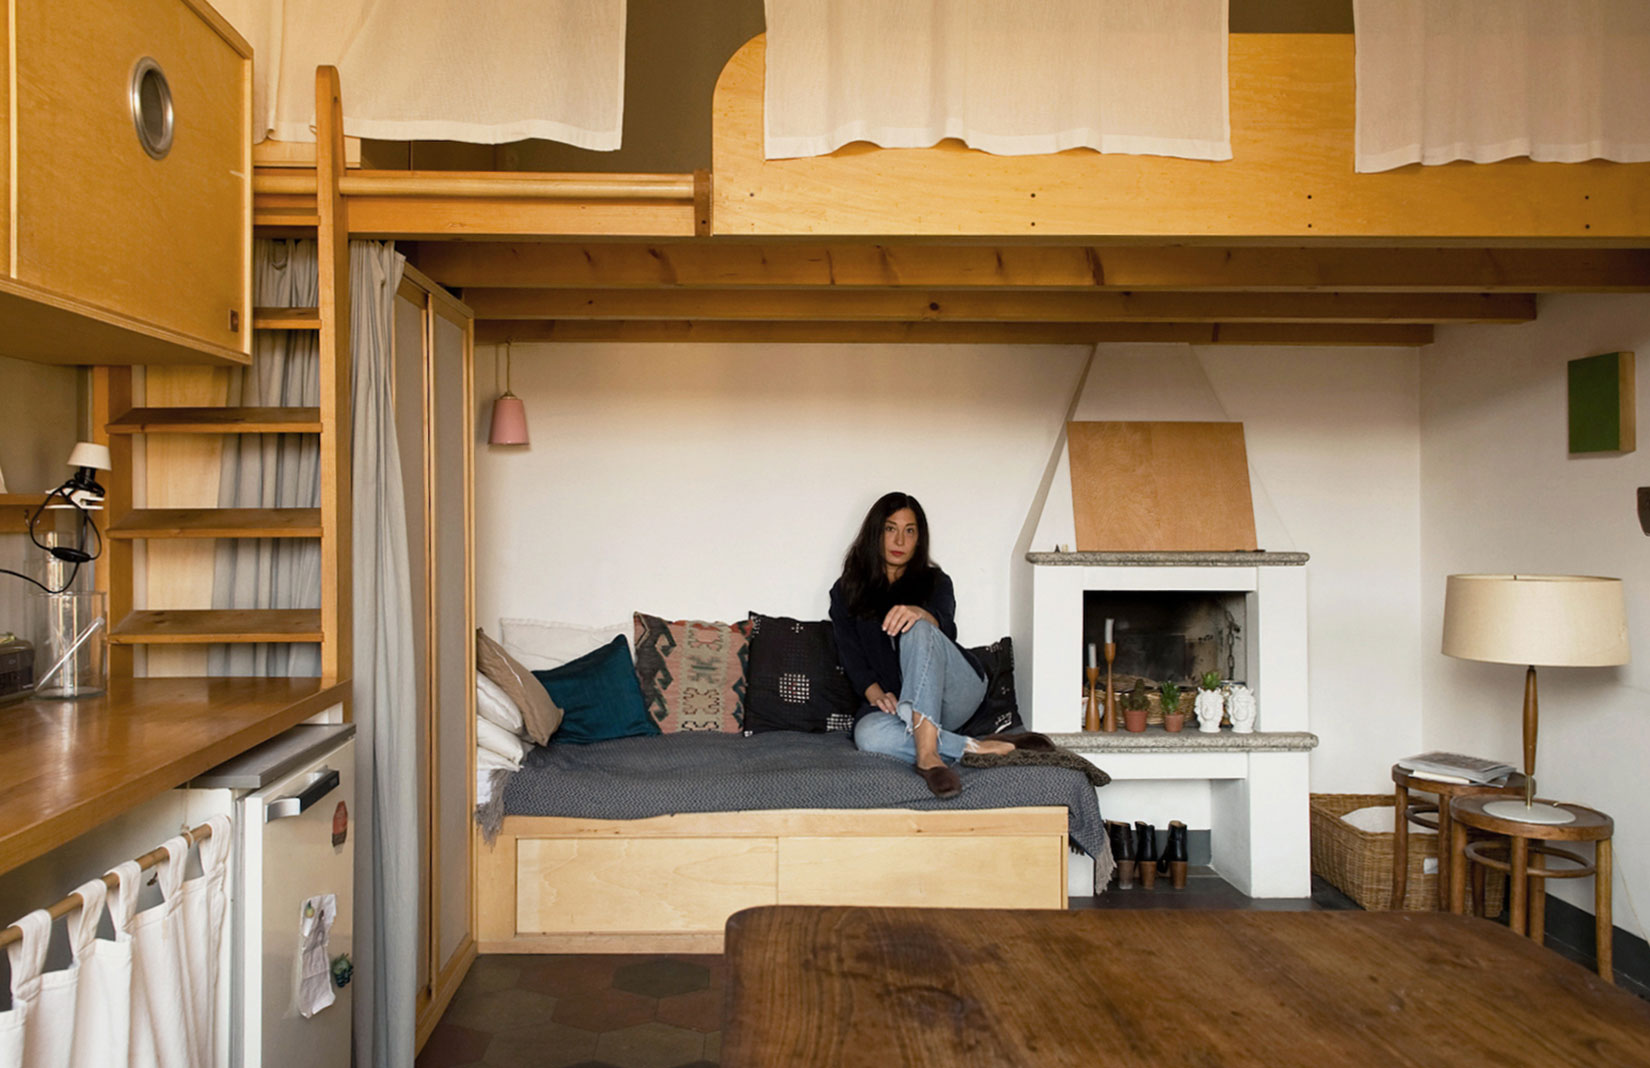 Andrea Wyner's micro home in Milan